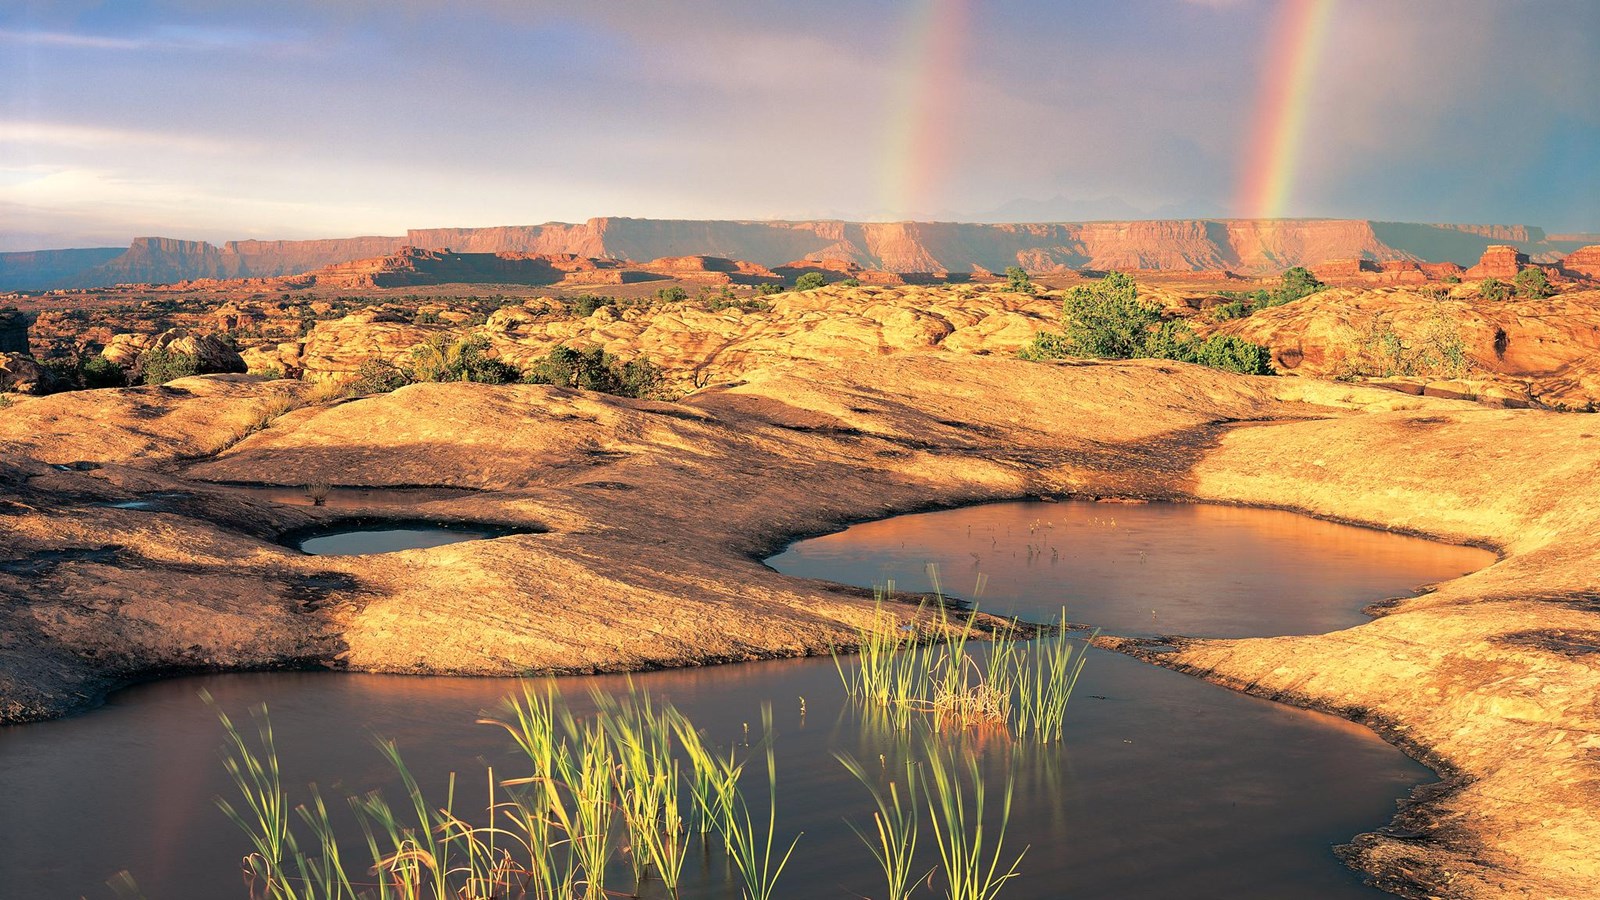 Water and grass fill several potholes- indentations in the sandstone after rain. Rainbows visible. 